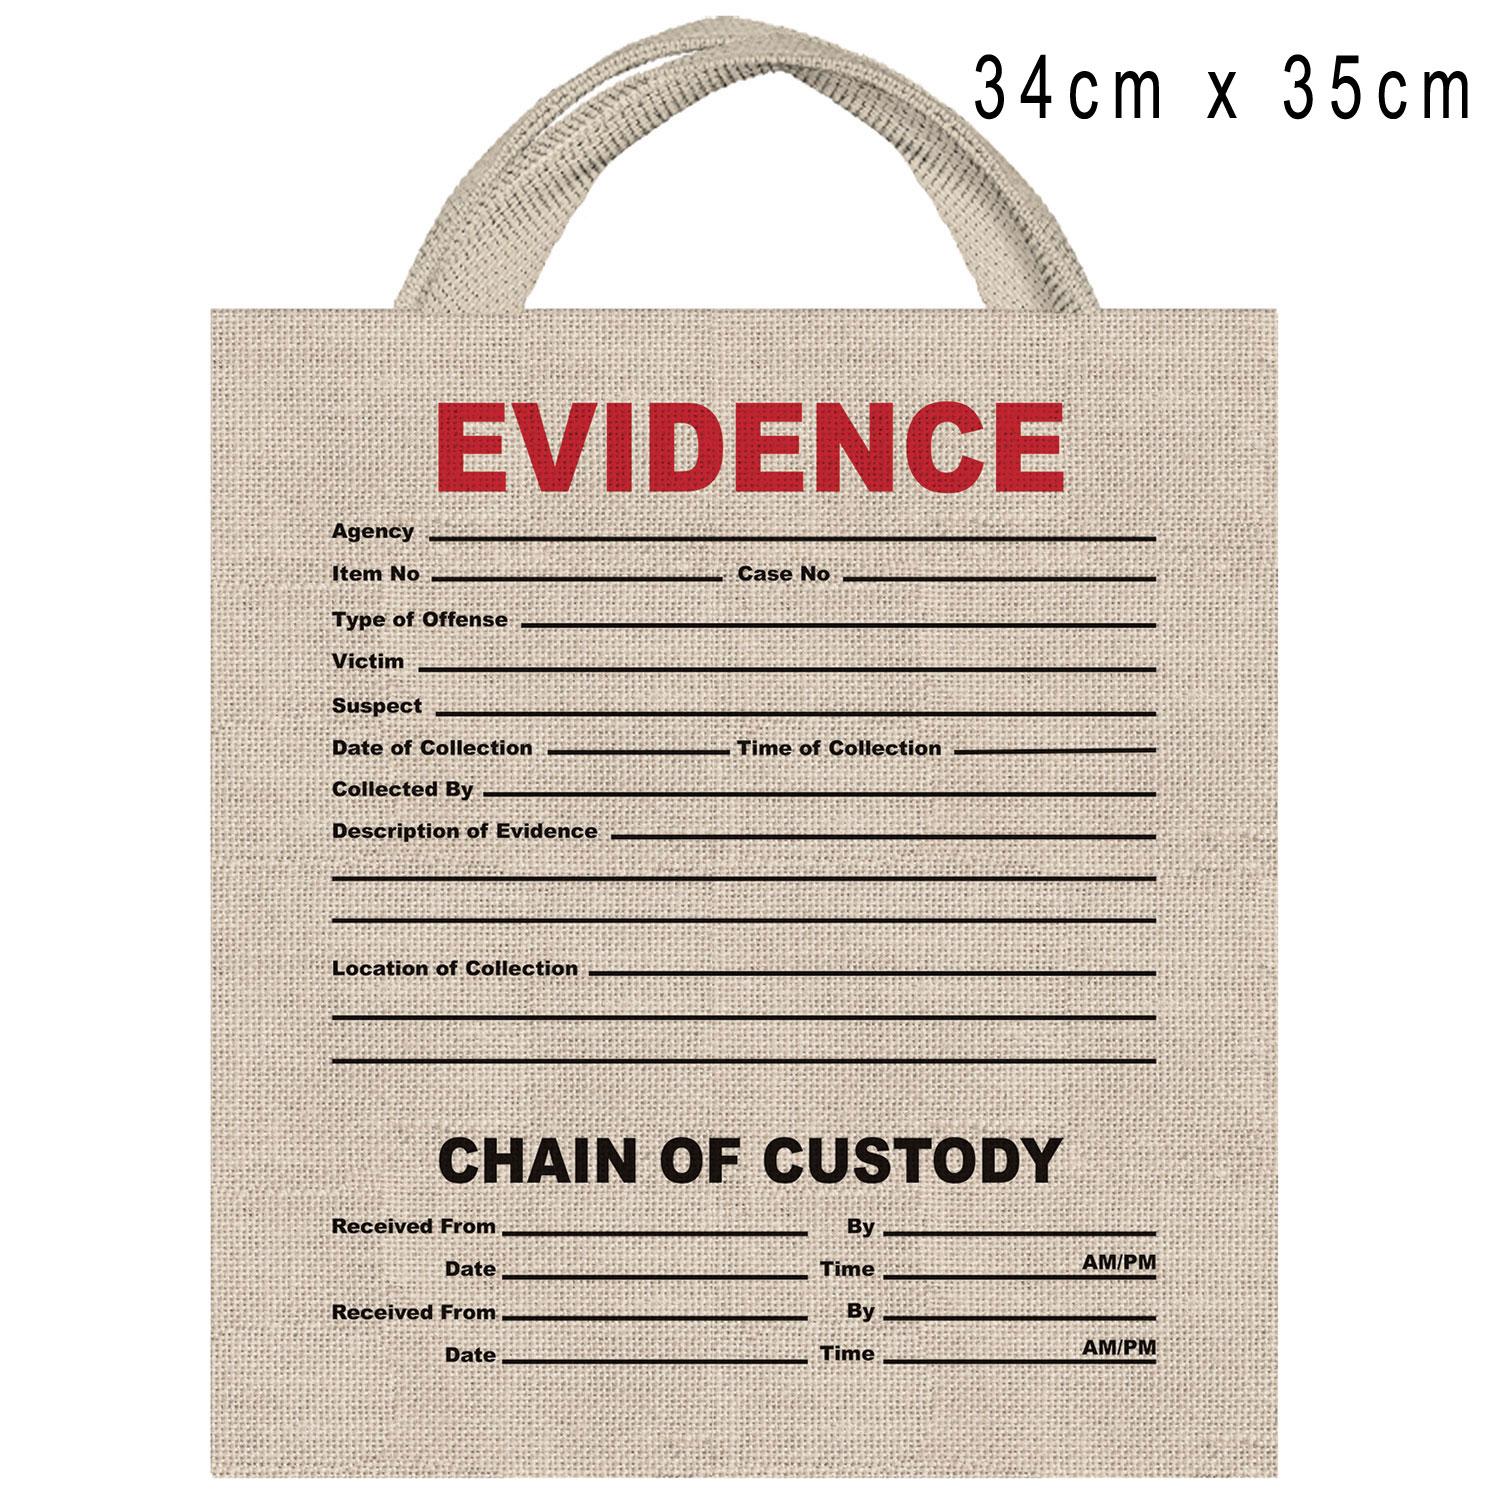 Evidence Canvas Treat Bag 34cm x 35cm by Amscan 370426 available here at Karnival Costumes online party shop